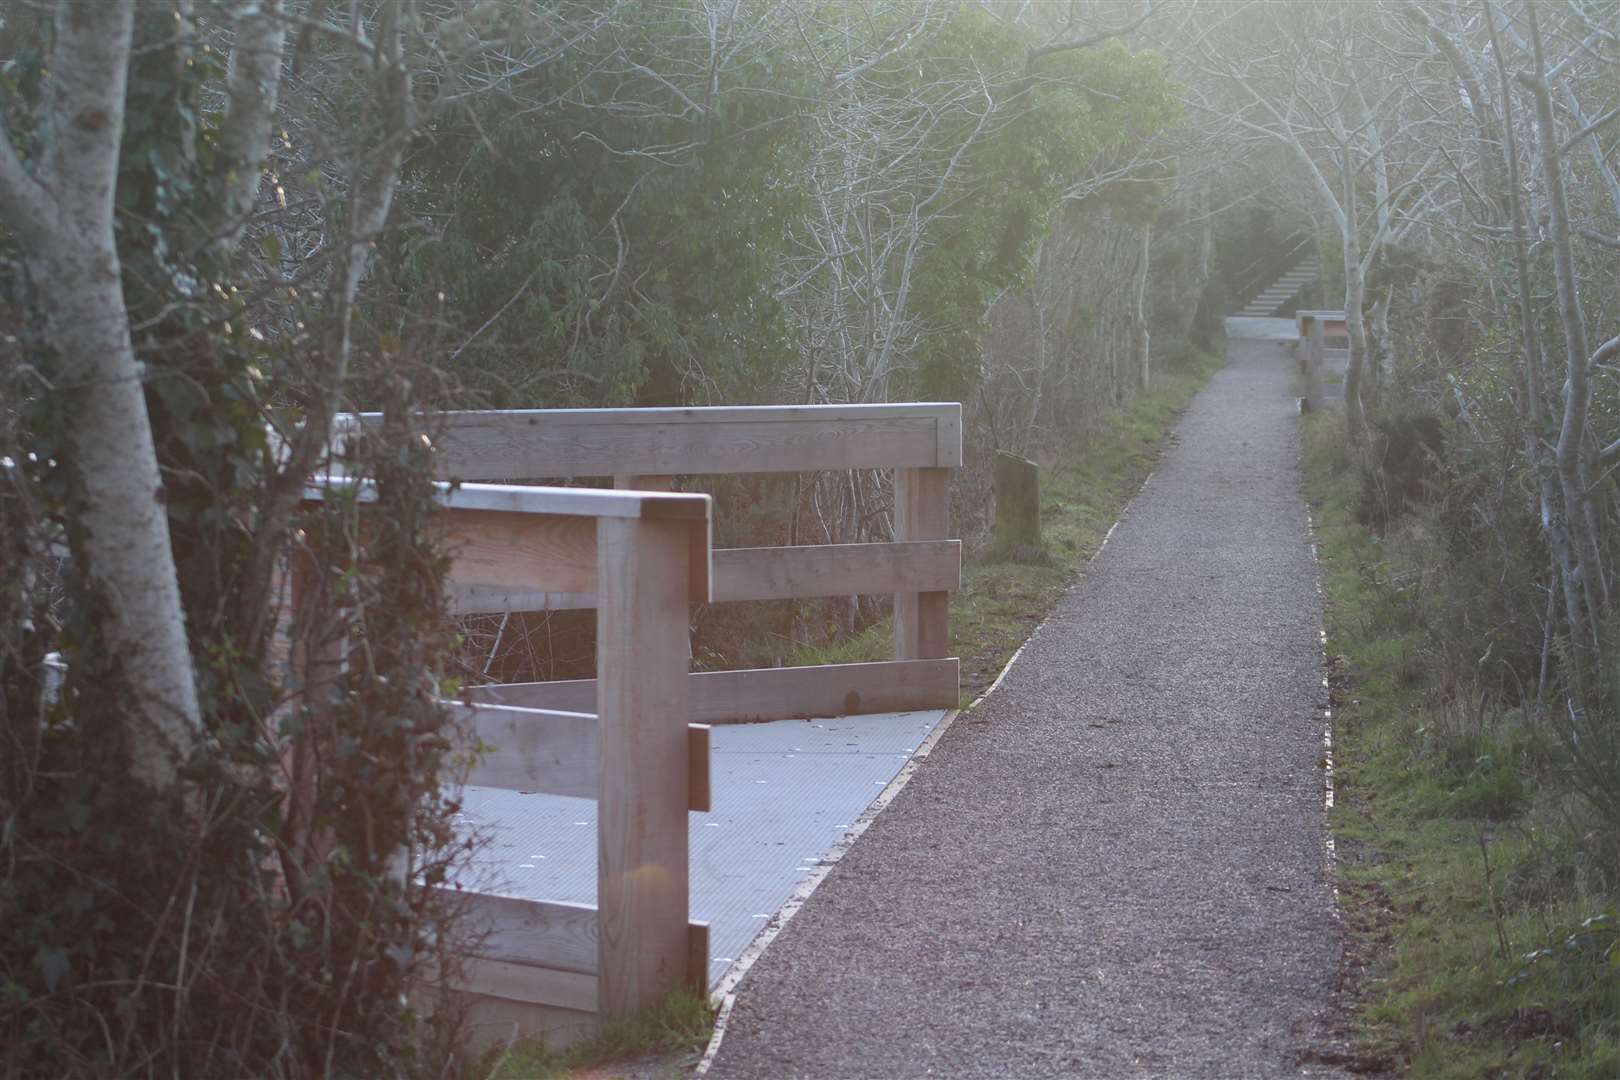 The path and one of the viewing platforms along ‘midgie lane’.